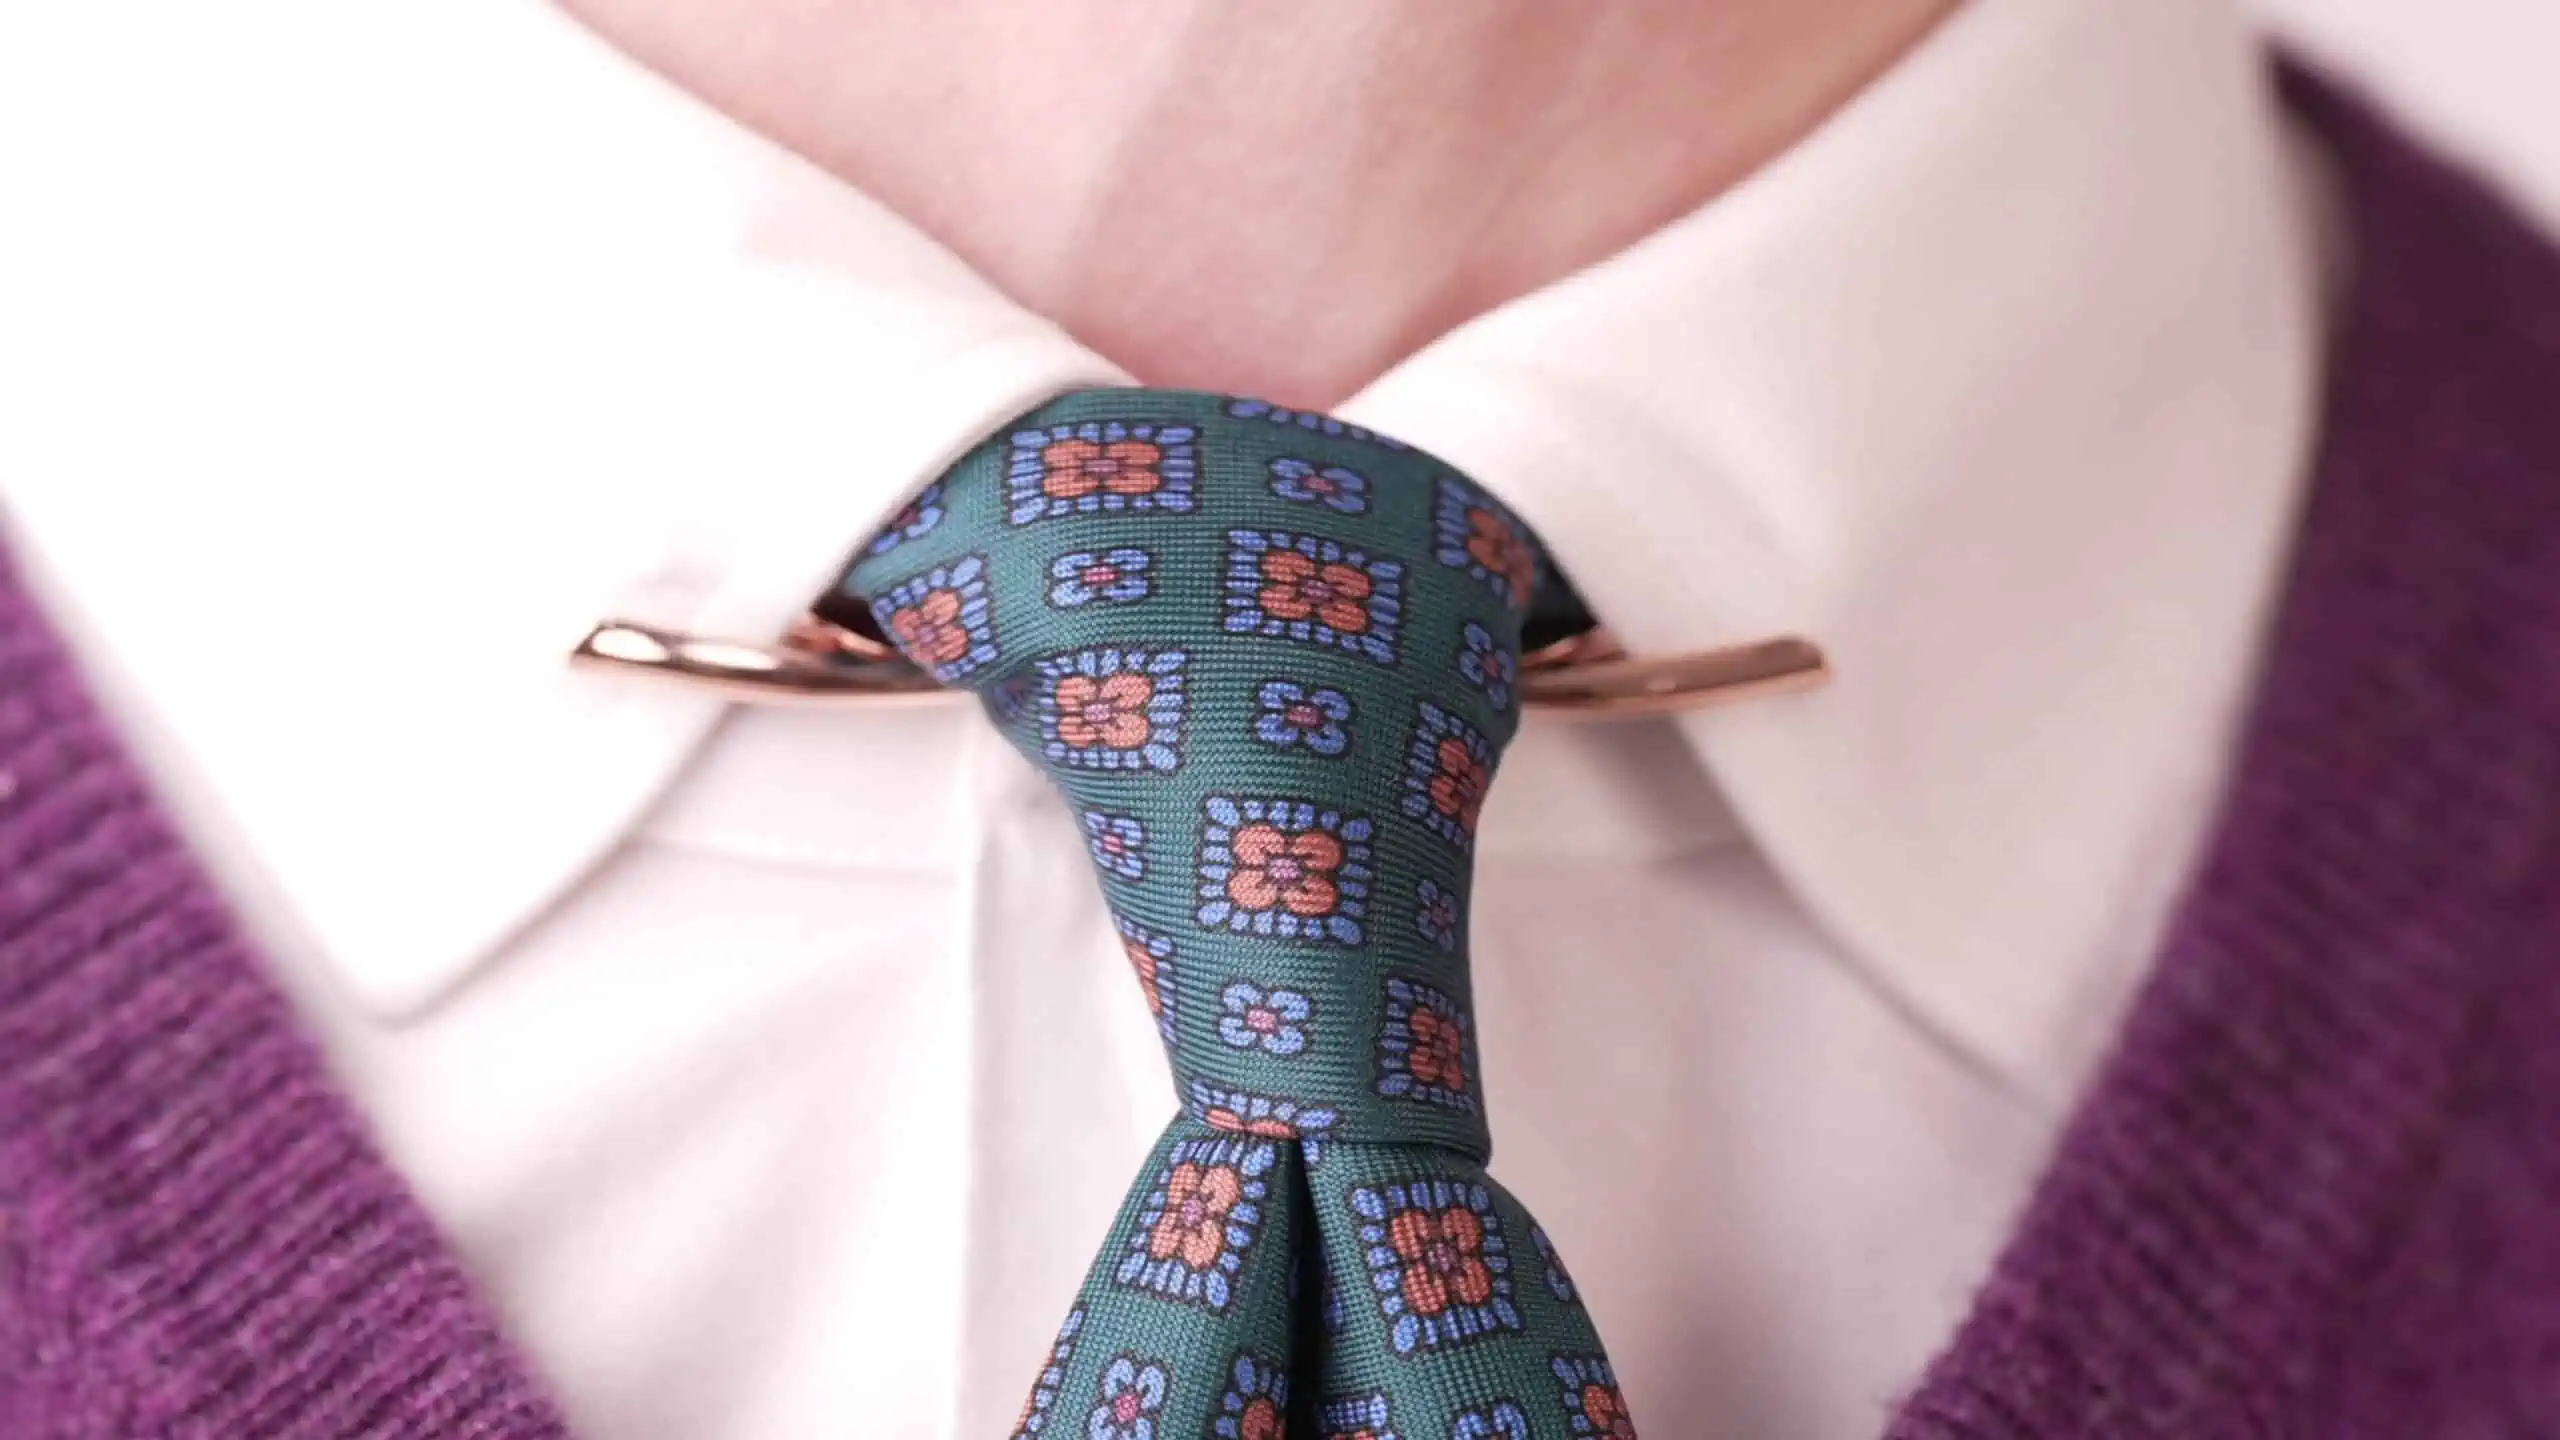 How To Style A Collar Clip - Tips For Men's Collar Clips, Bars, & Pins